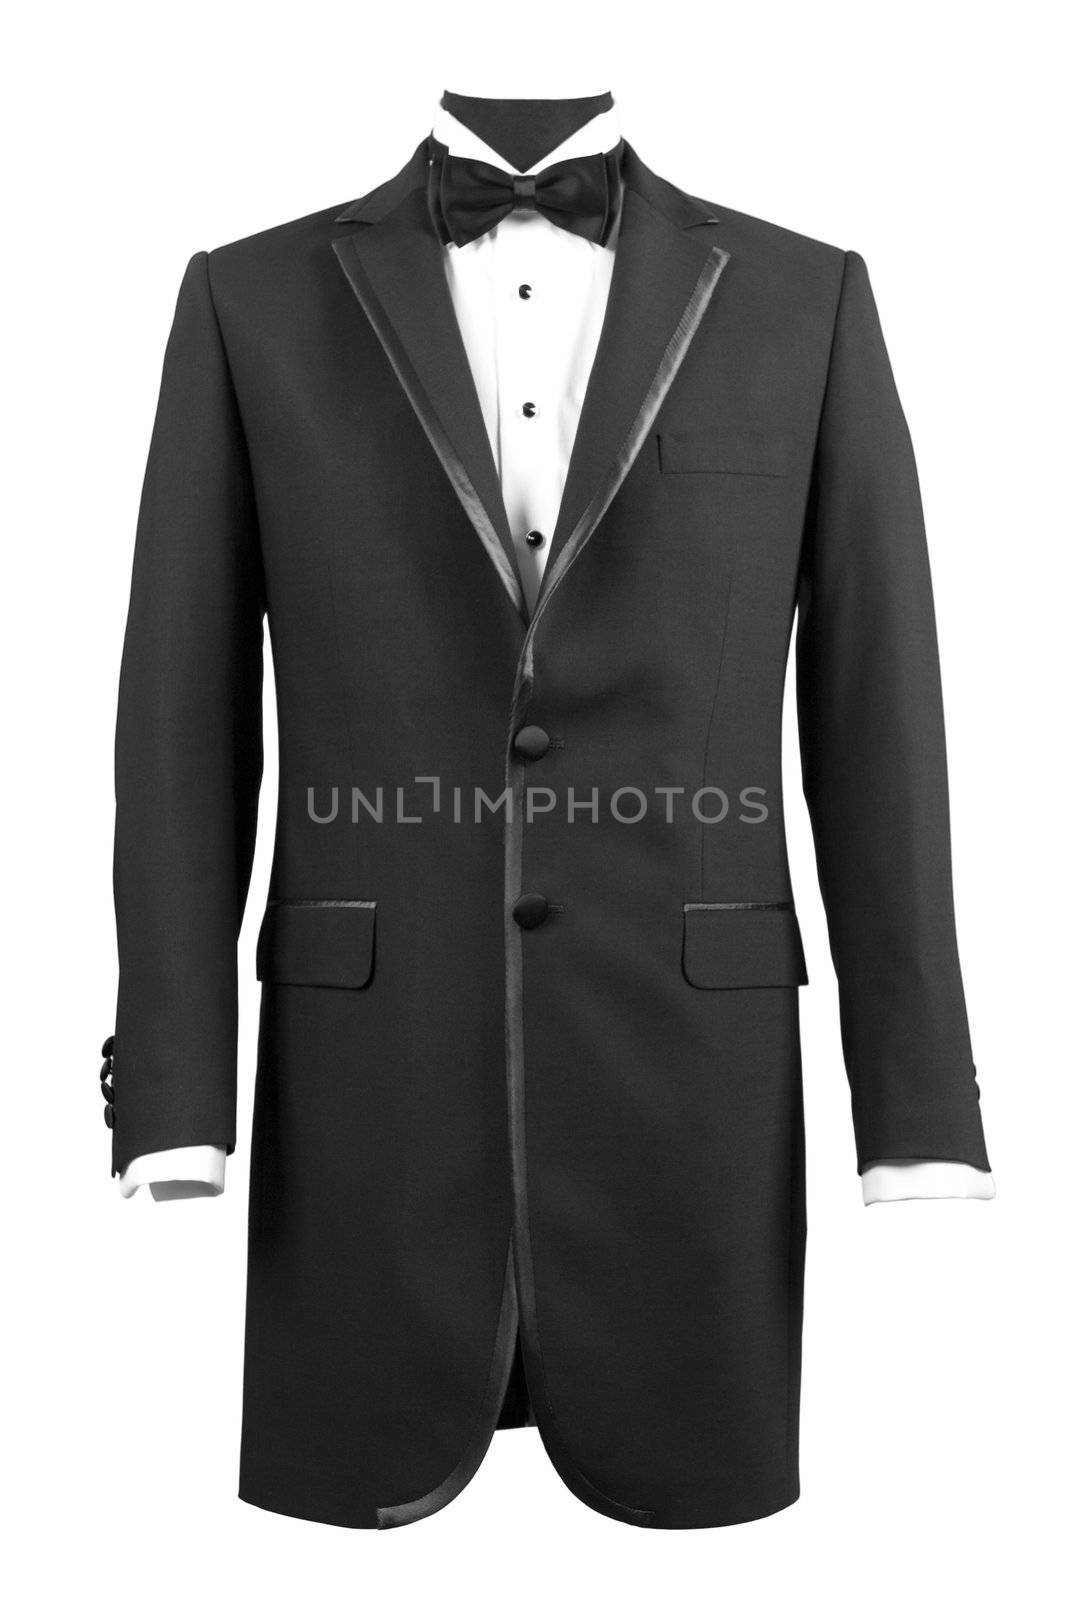 front view of black tuxedo and white shirt